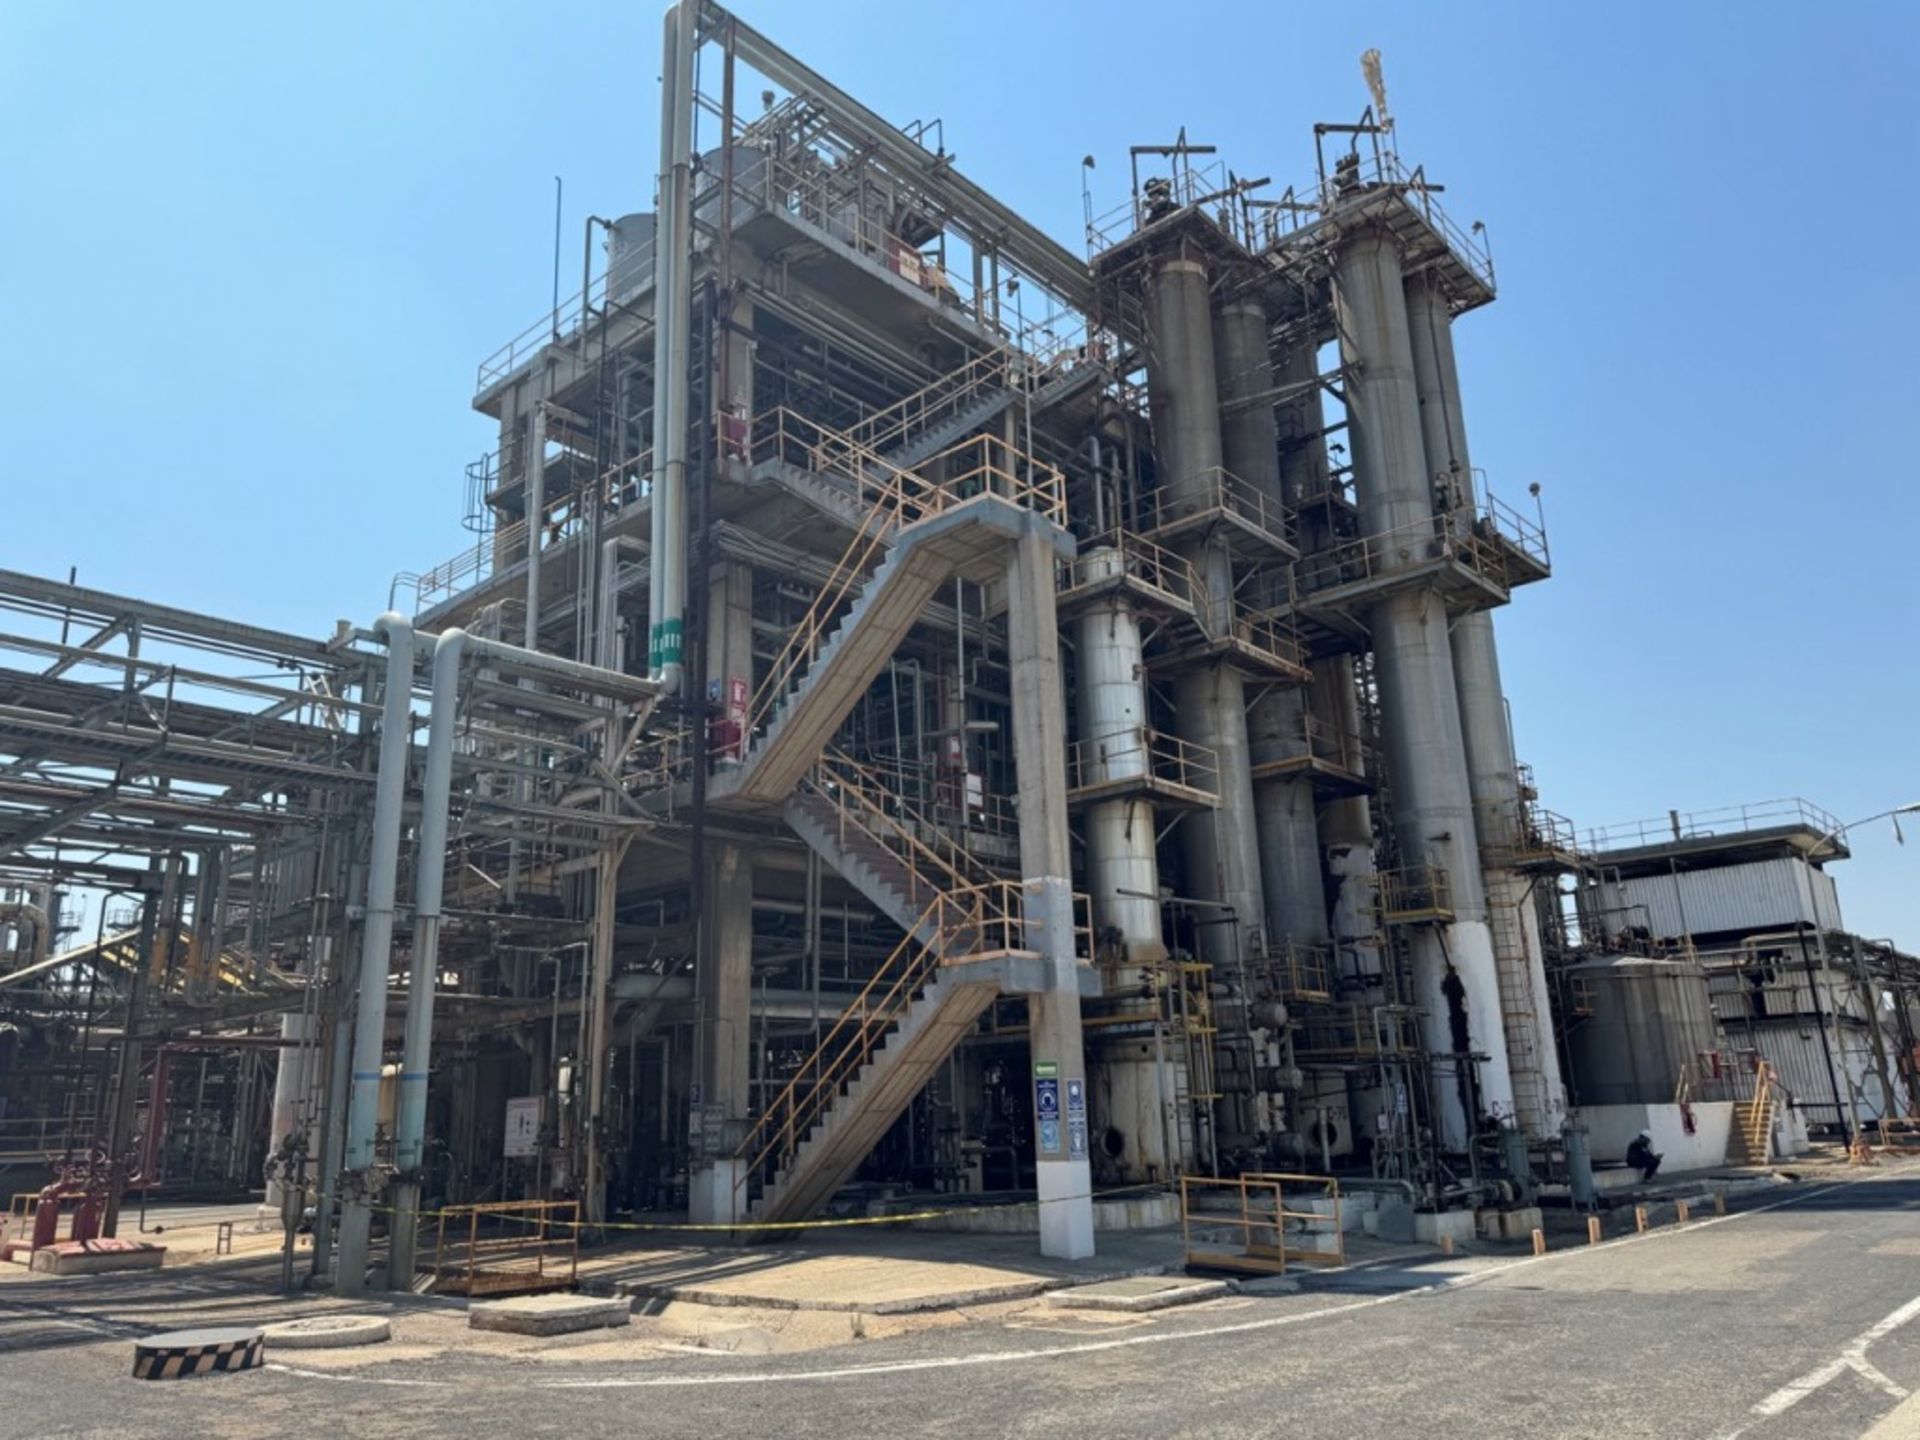 Complete industrial plant for chemical process, with capacity to produce 85,000 tons/year of Caprol